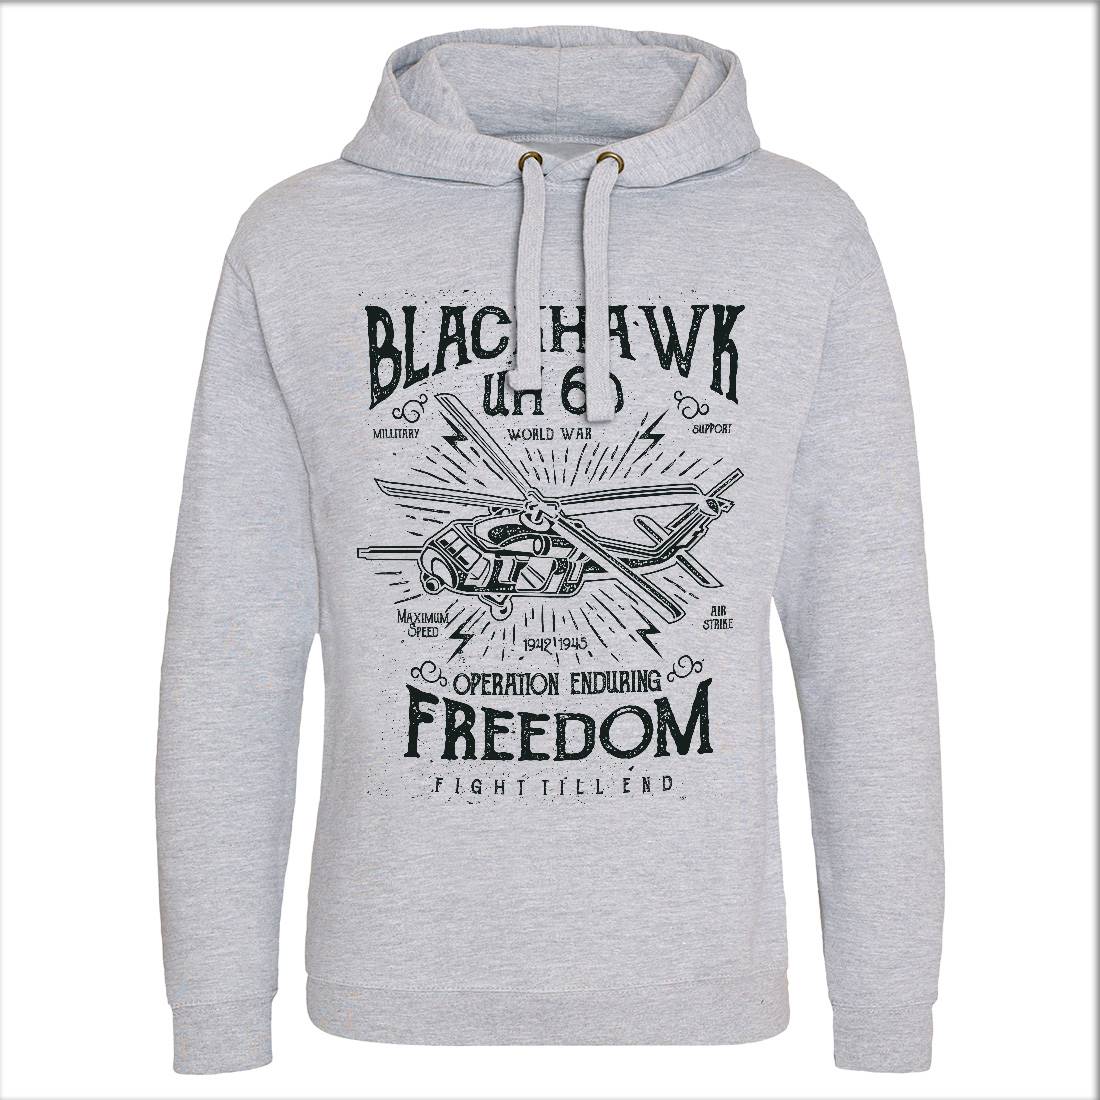 Blackhawk Mens Hoodie Without Pocket Army A016